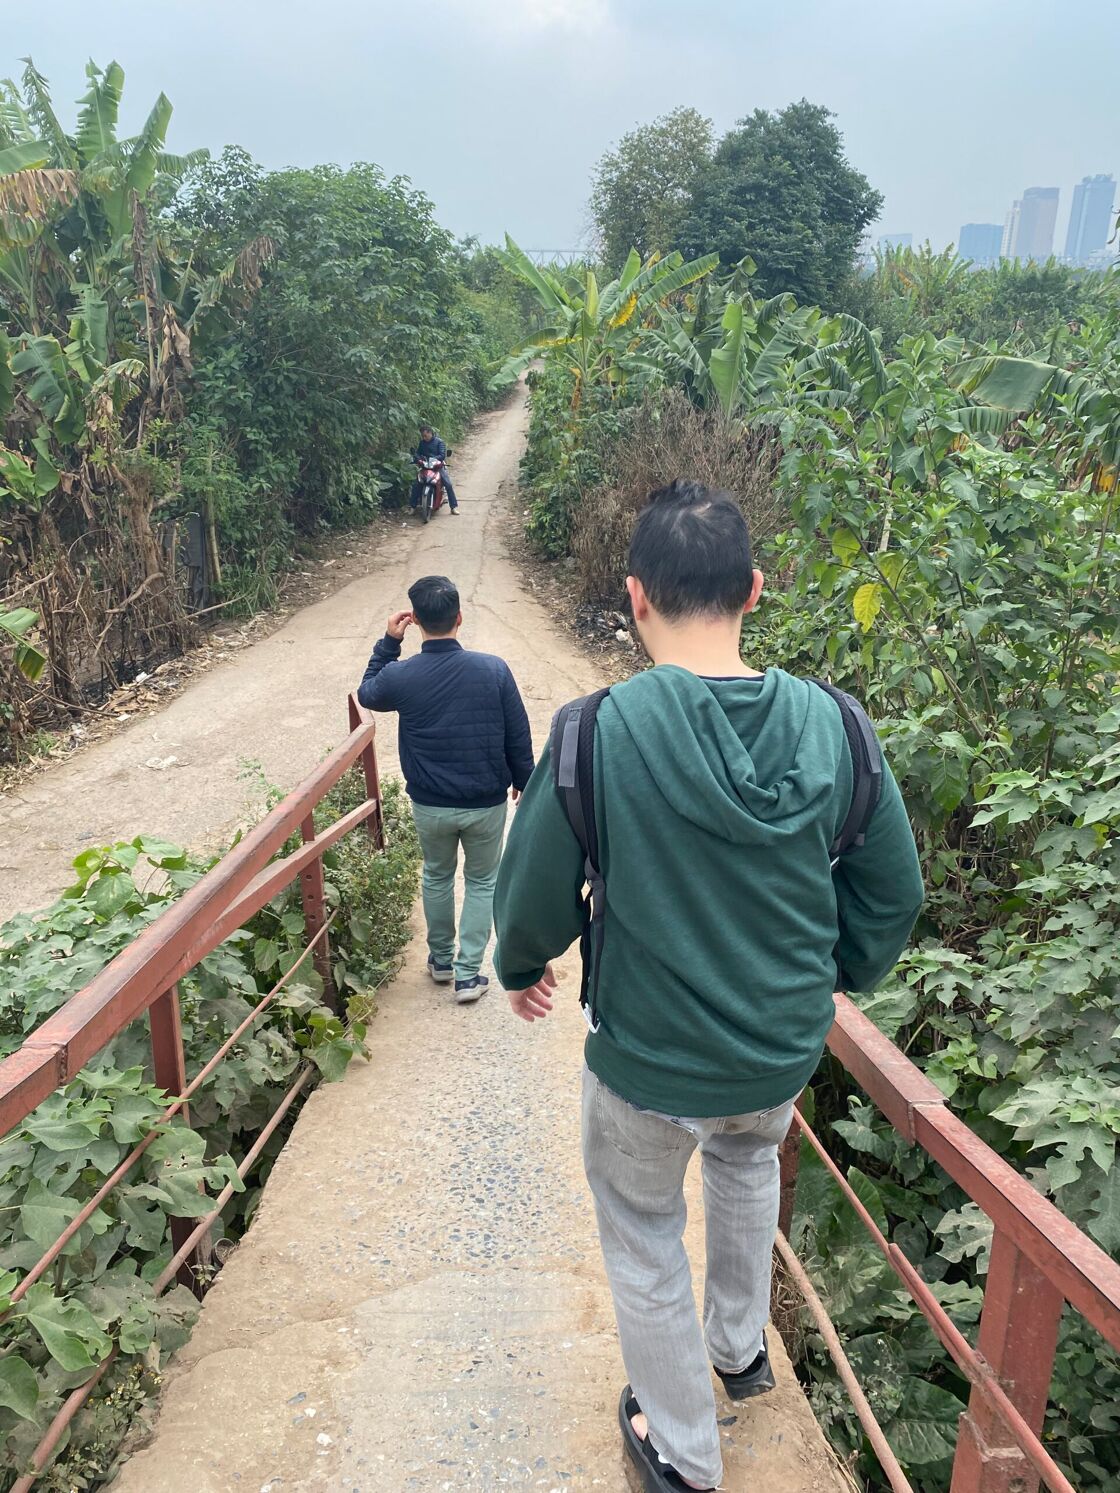 Men walking down a path into a banana farm with city skyscrapers in the distance.